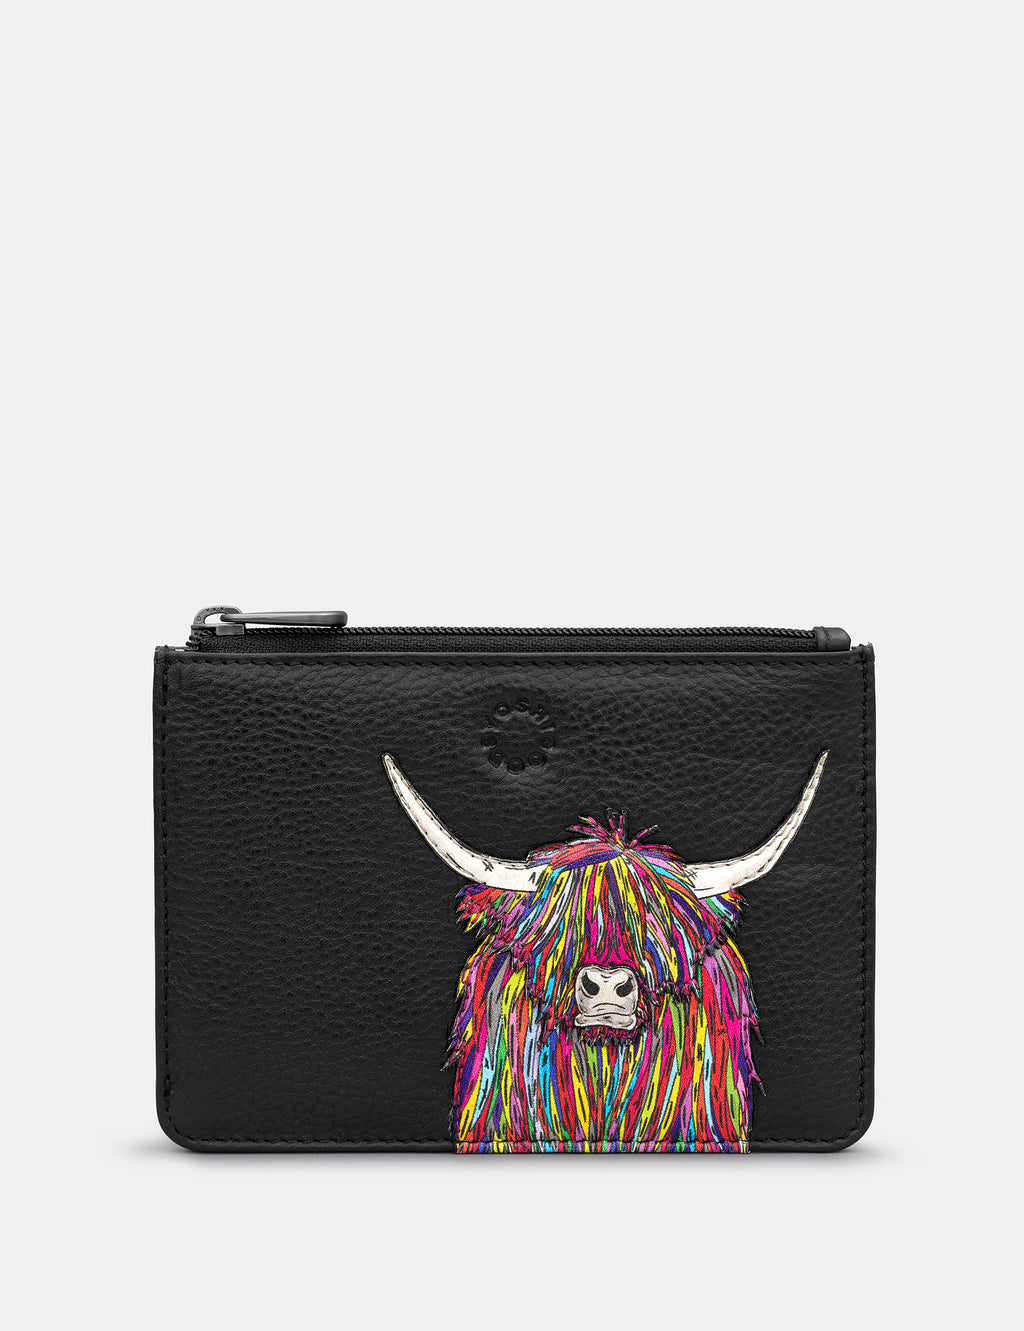 Highland Cow Black Zip Top Leather Purse